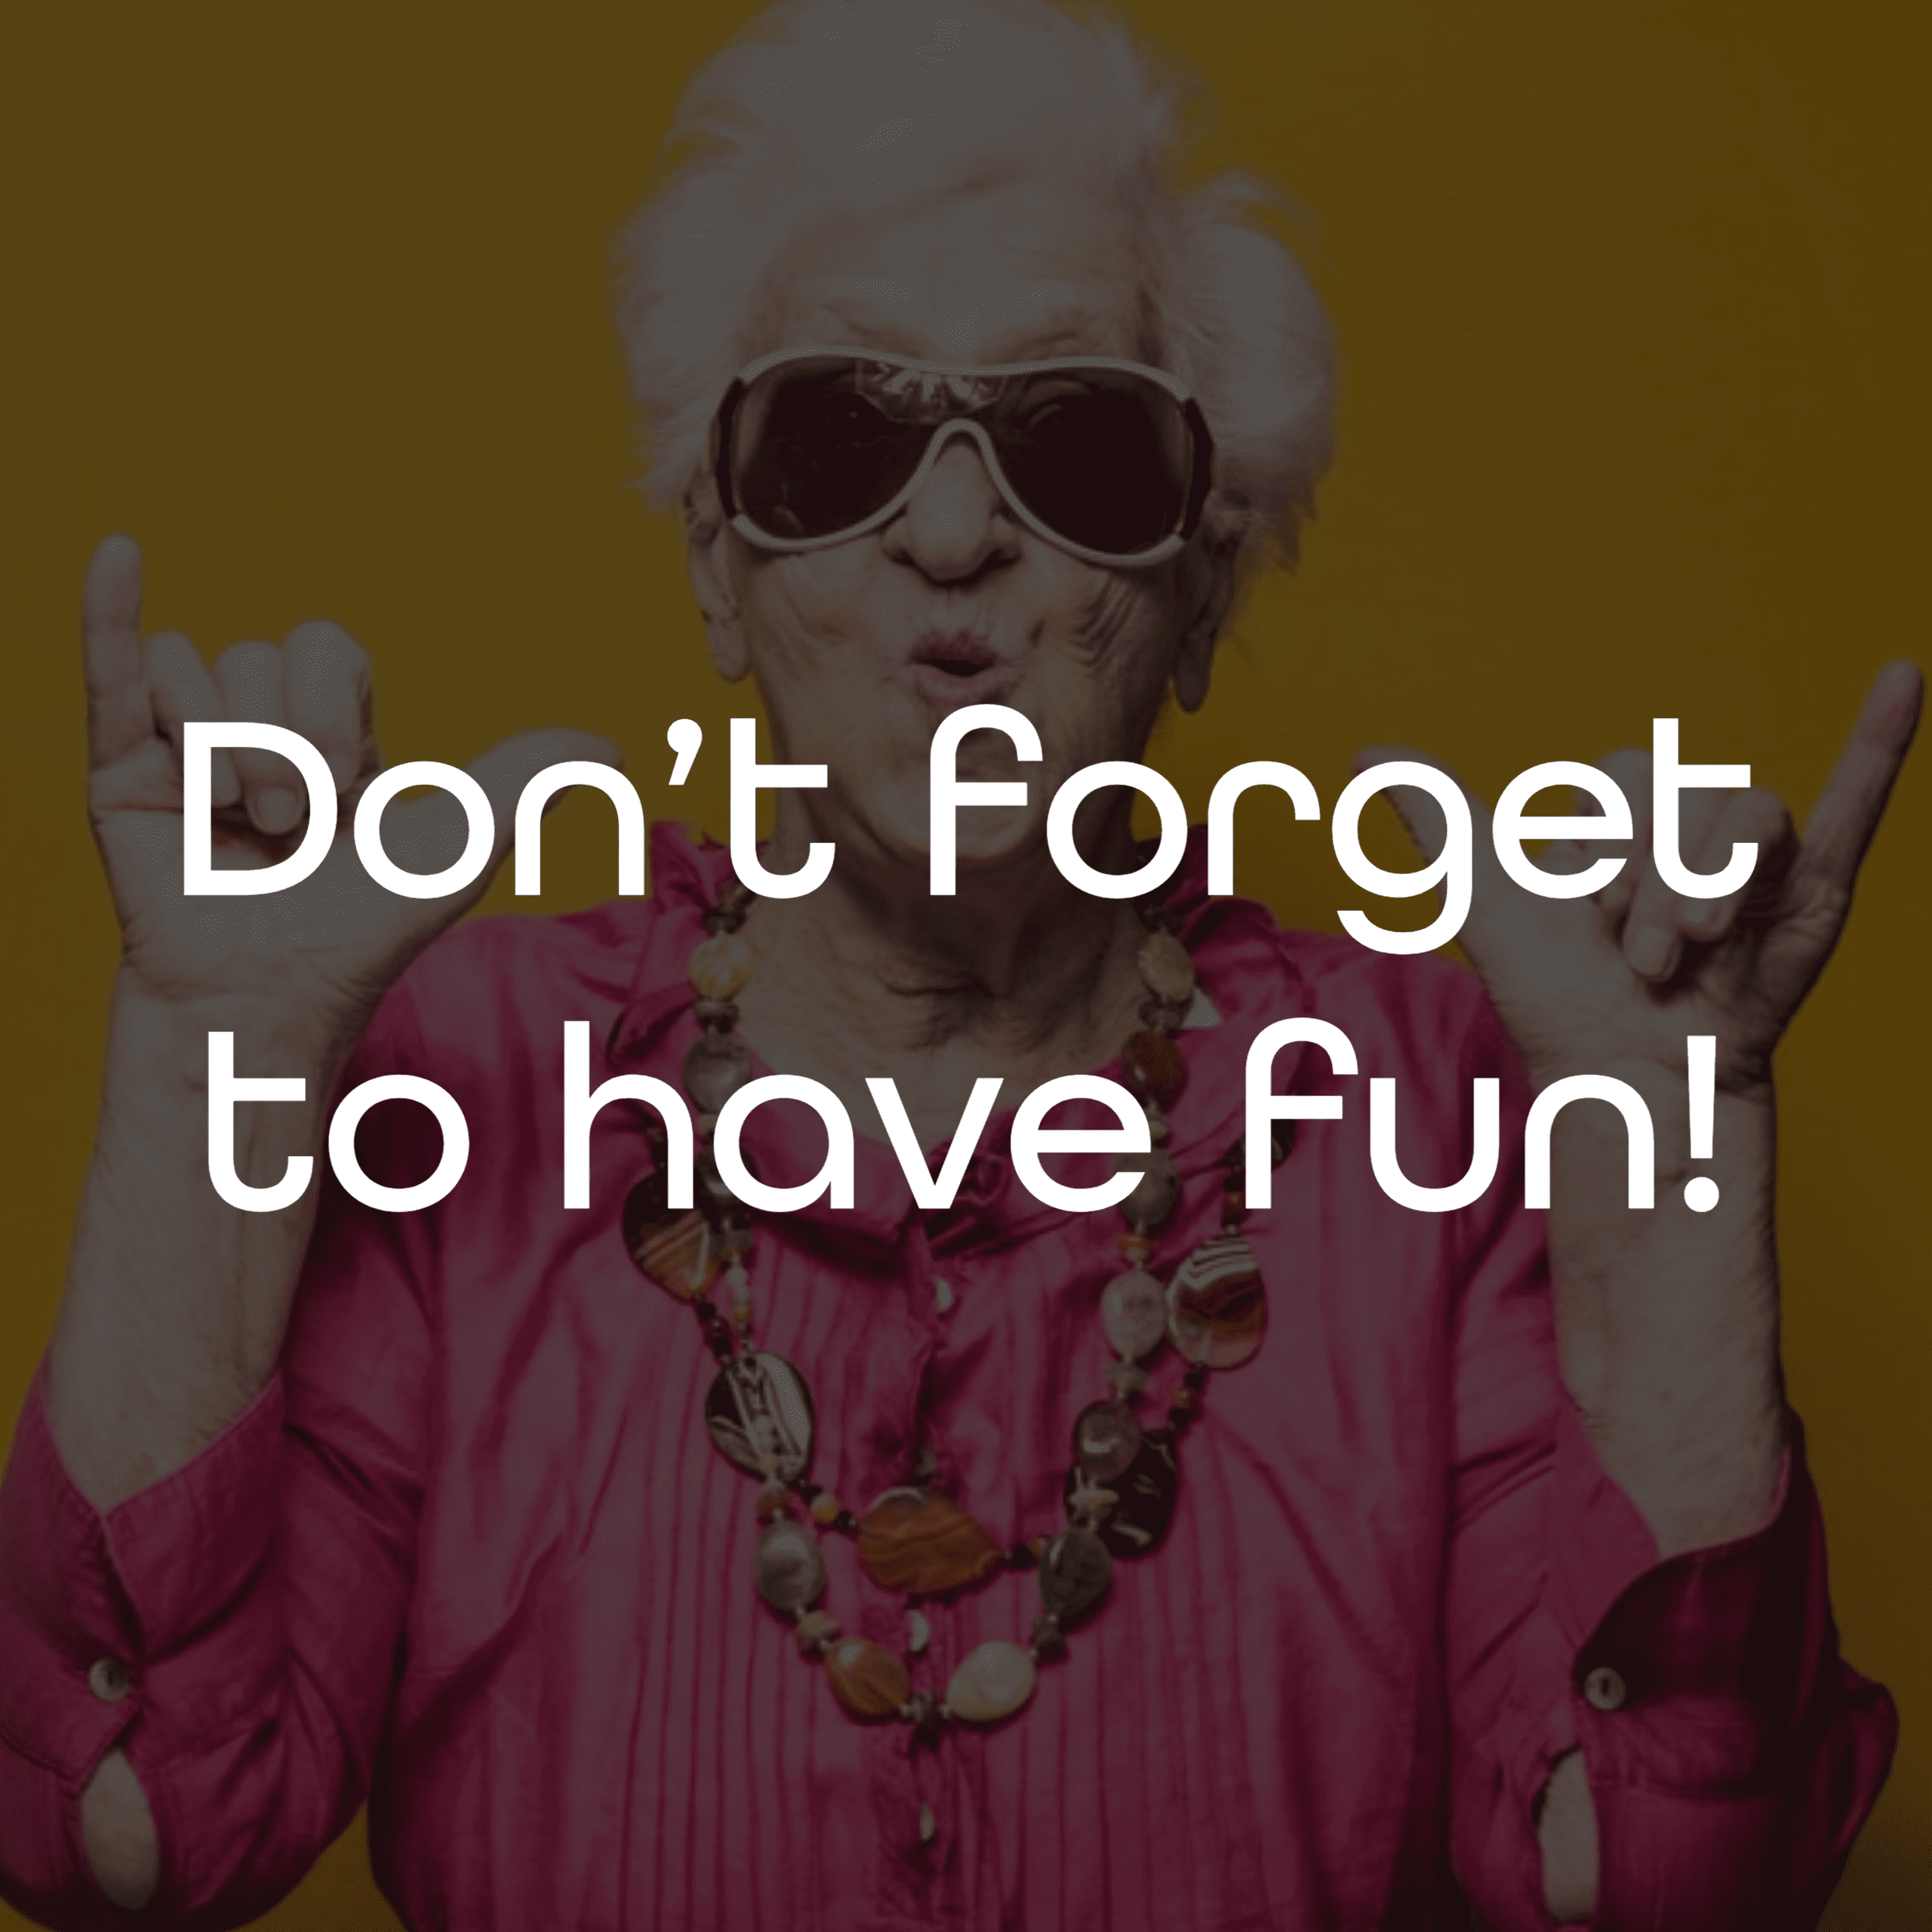 Don't forget to have fun!